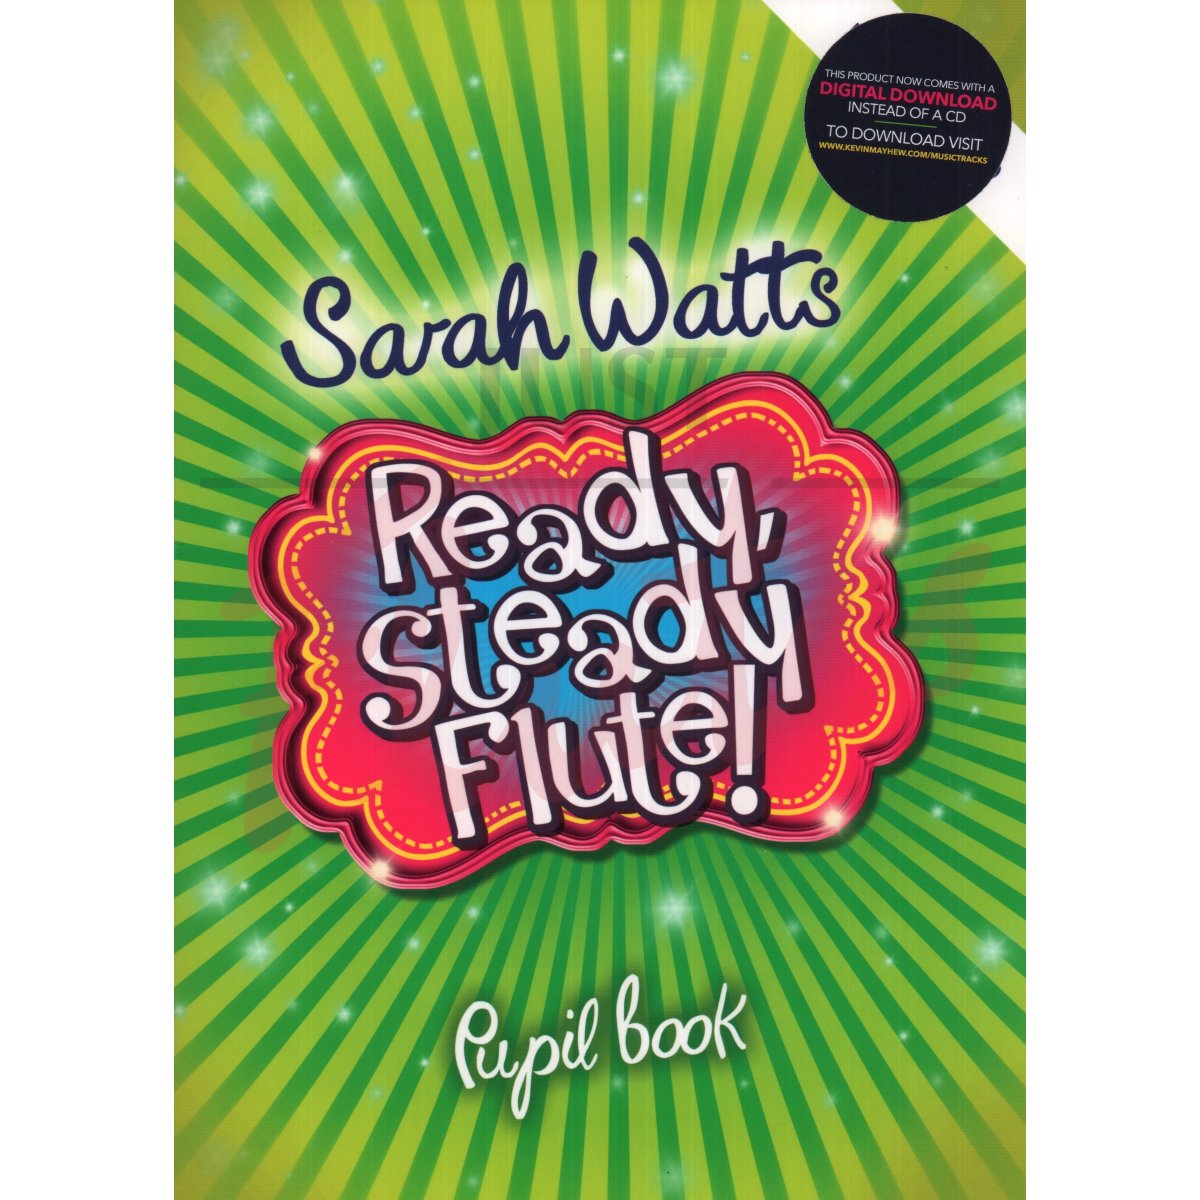 Ready, Steady Flute! [Pupil's Book]